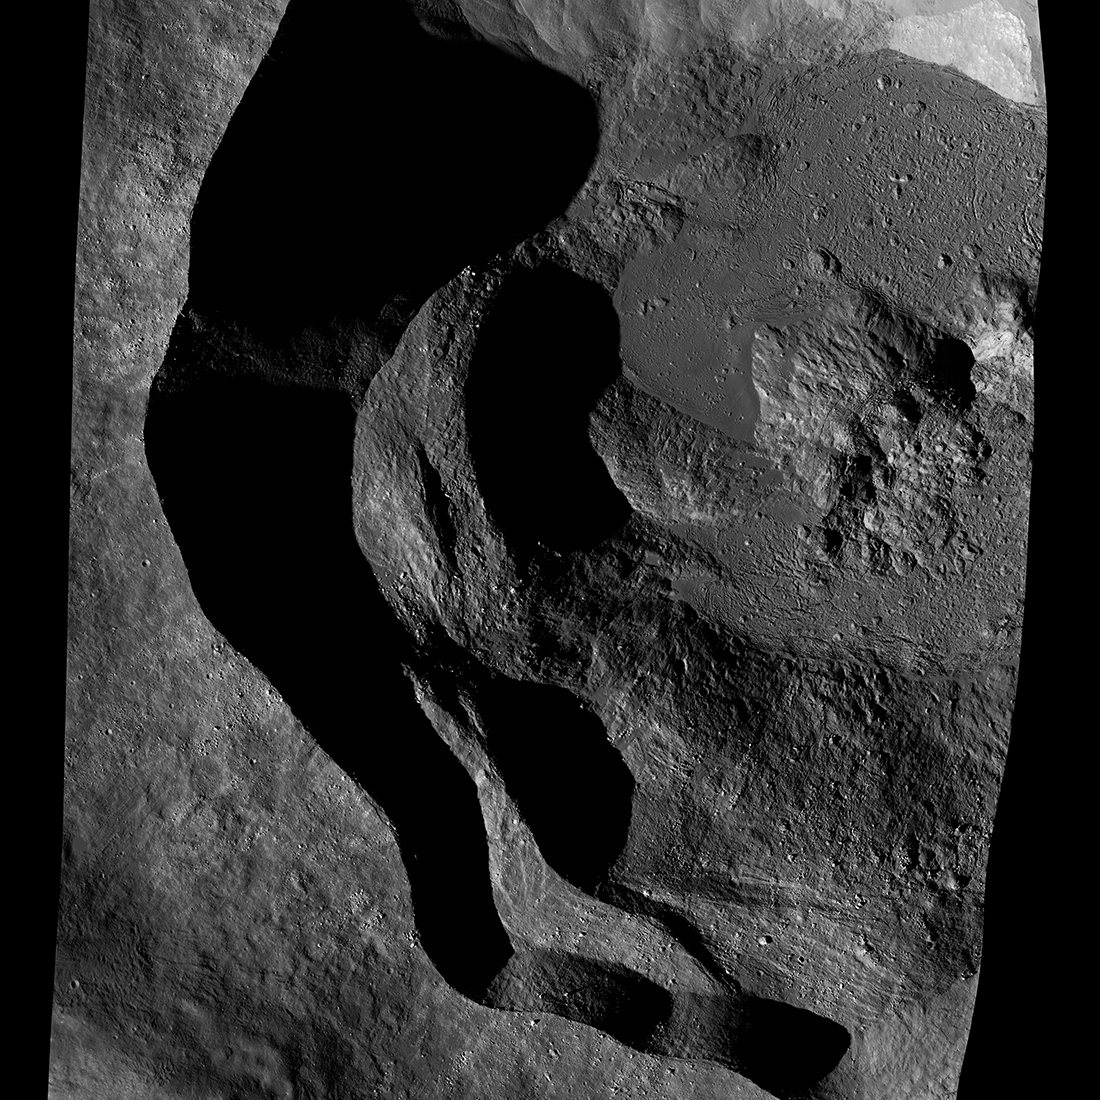 Crater with sharp, sinuous edge and deep shadows.